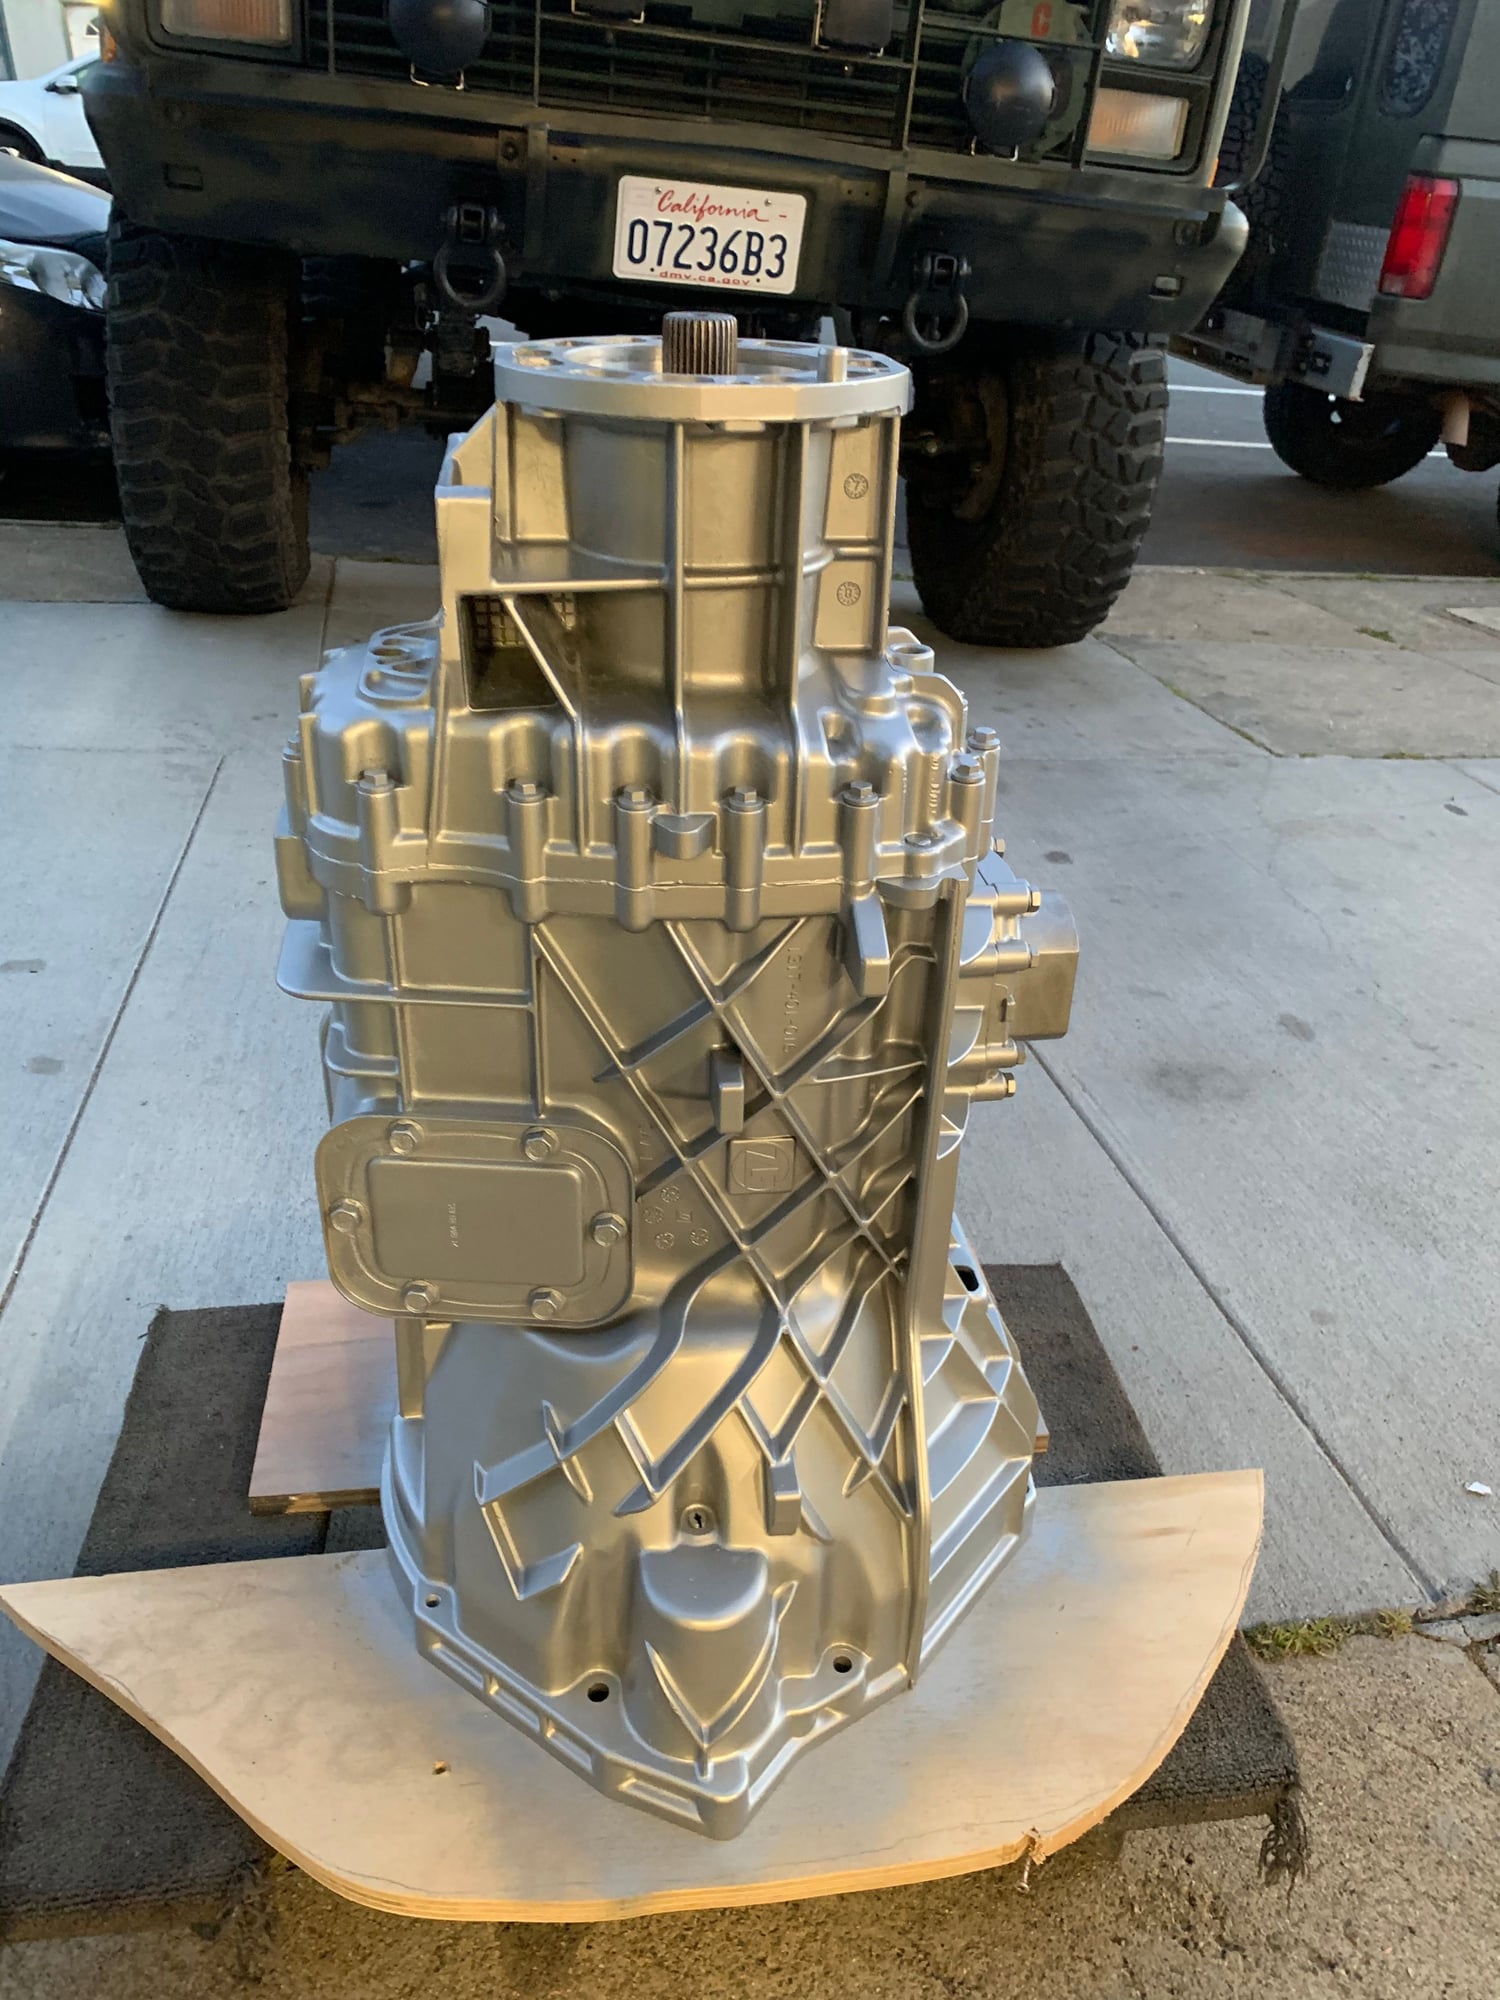 Drivetrain - Rebuilt ZF5 Manual Transmissions - New - 1987 to 2010 Ford All Models - Long Beach, CA 90802, United States